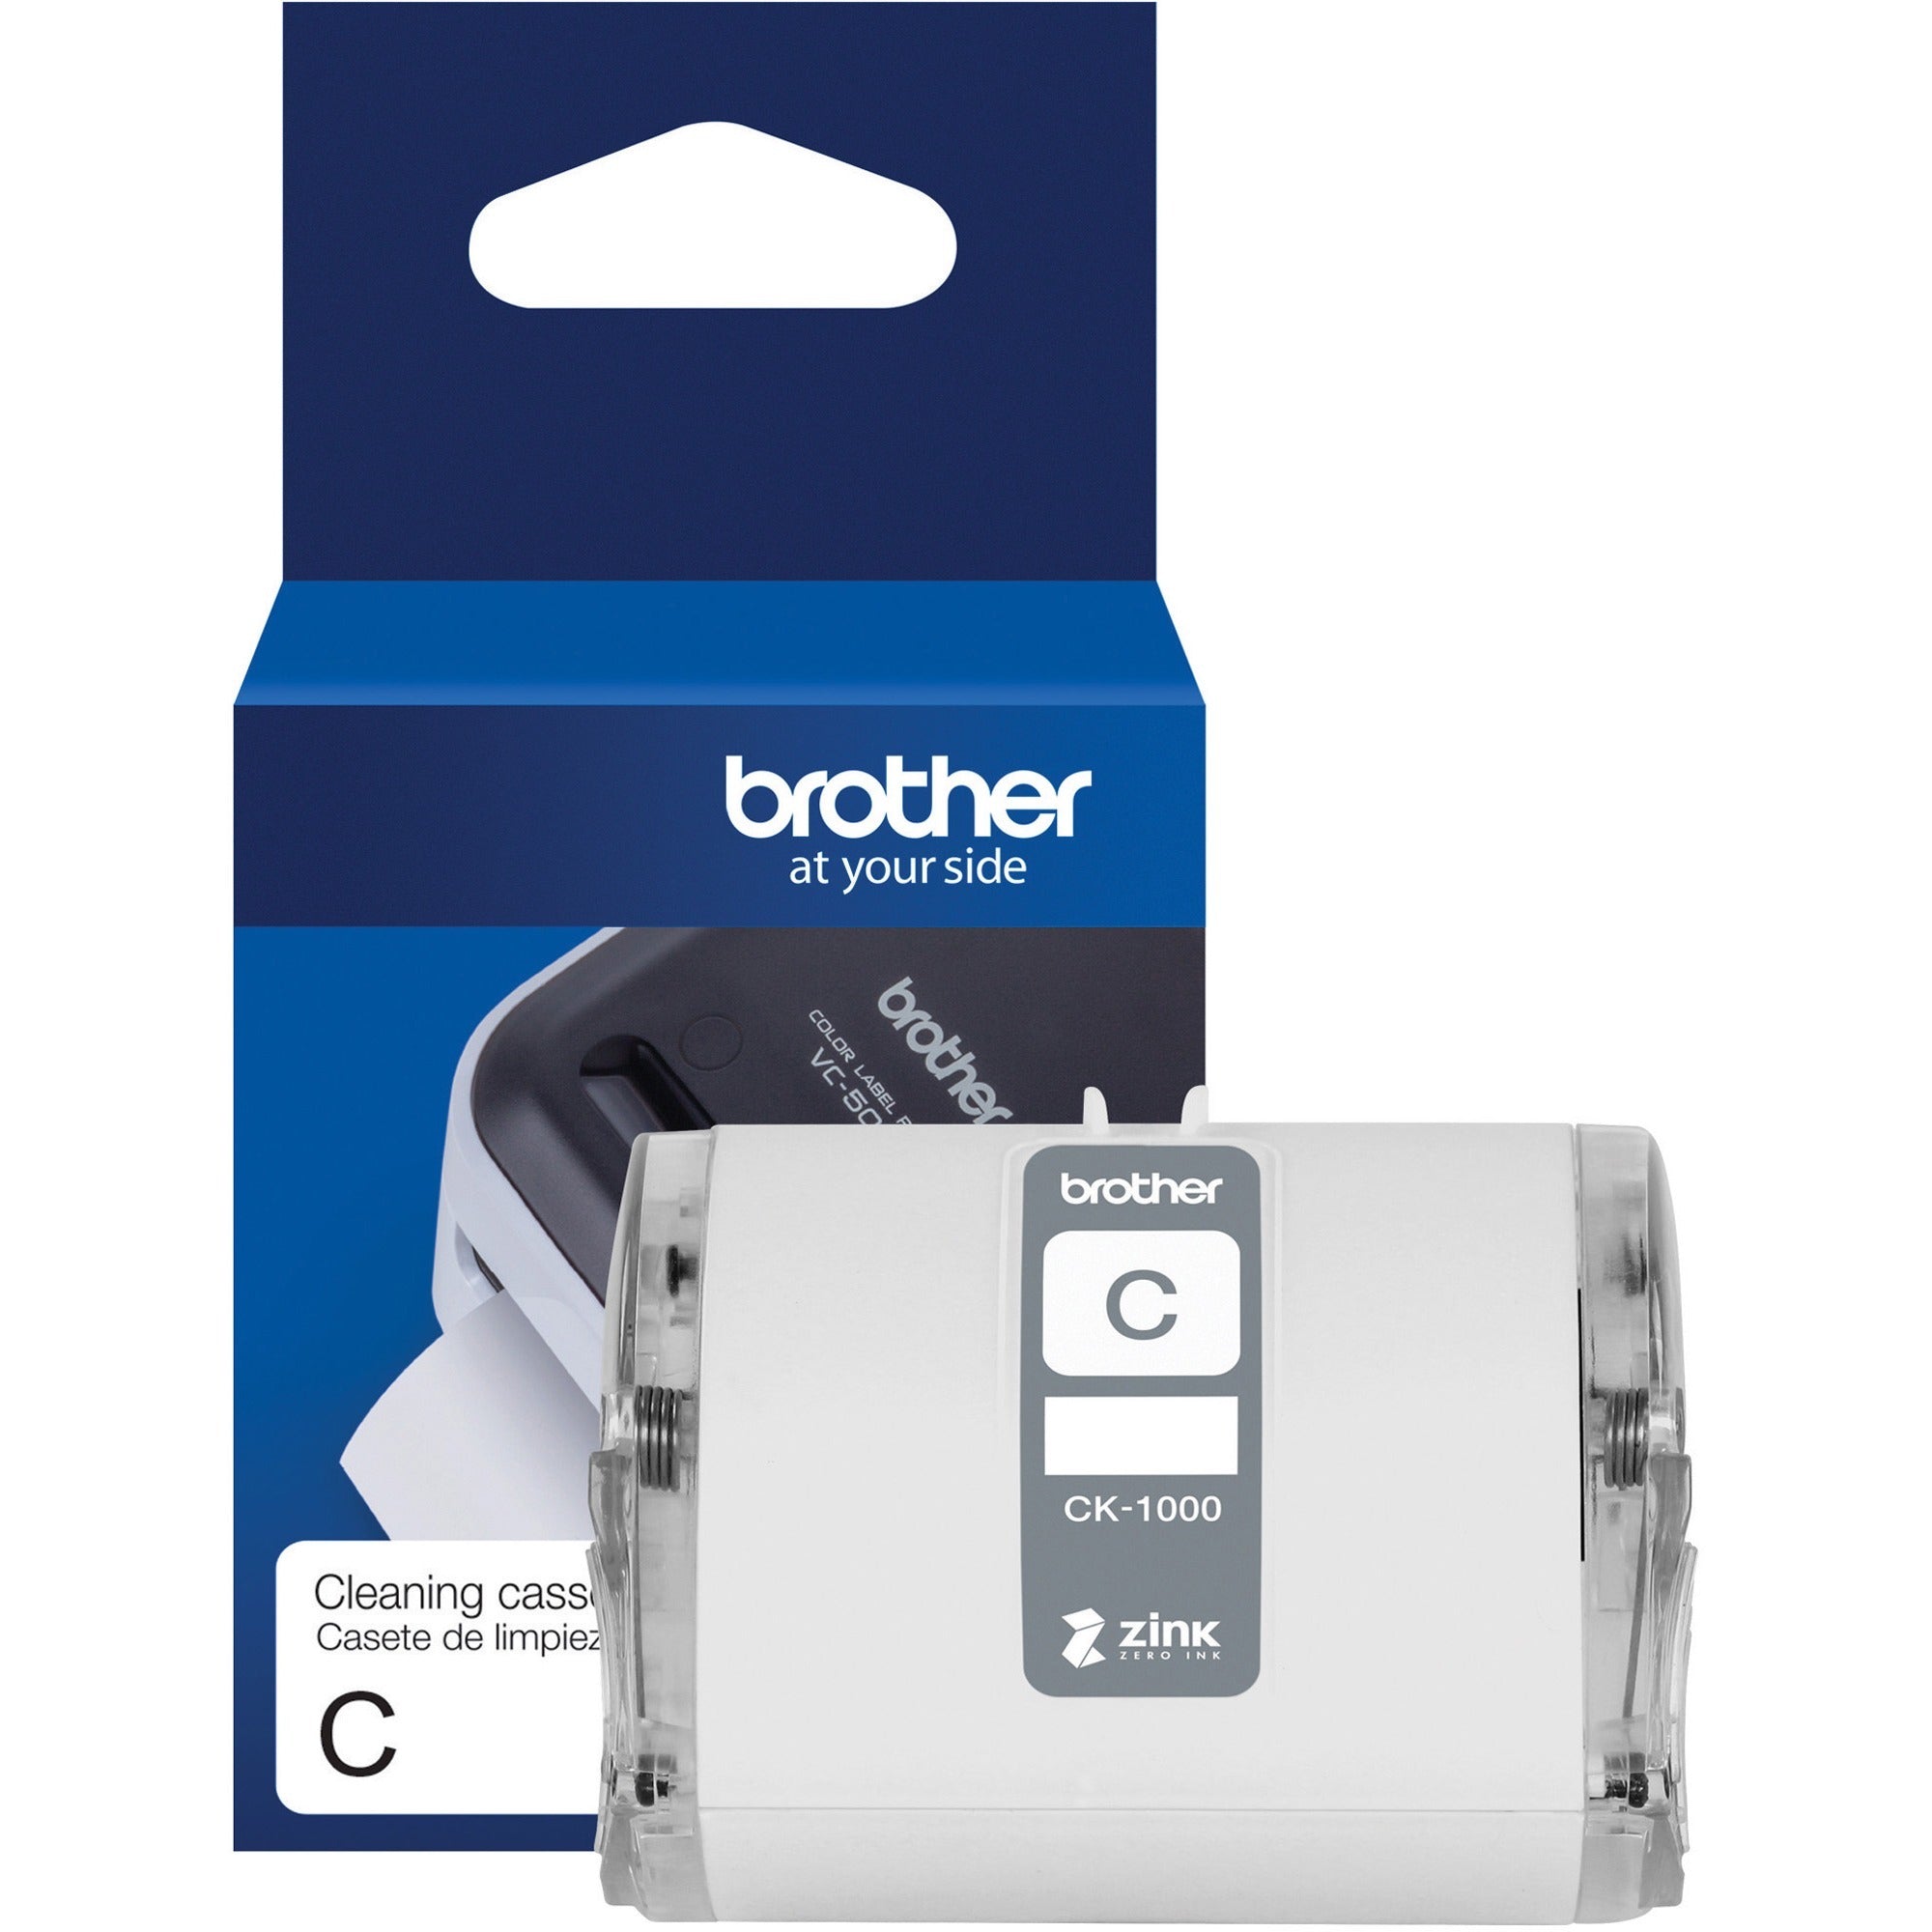 Brother Genuine CK-1000 ~ 2 (1.97") 50 mm wide x 6.5 ft. (2 m) Cleaning Roll for Brother VC-500W Label and Photo Printers - For Printer - 1 Each - White - 1